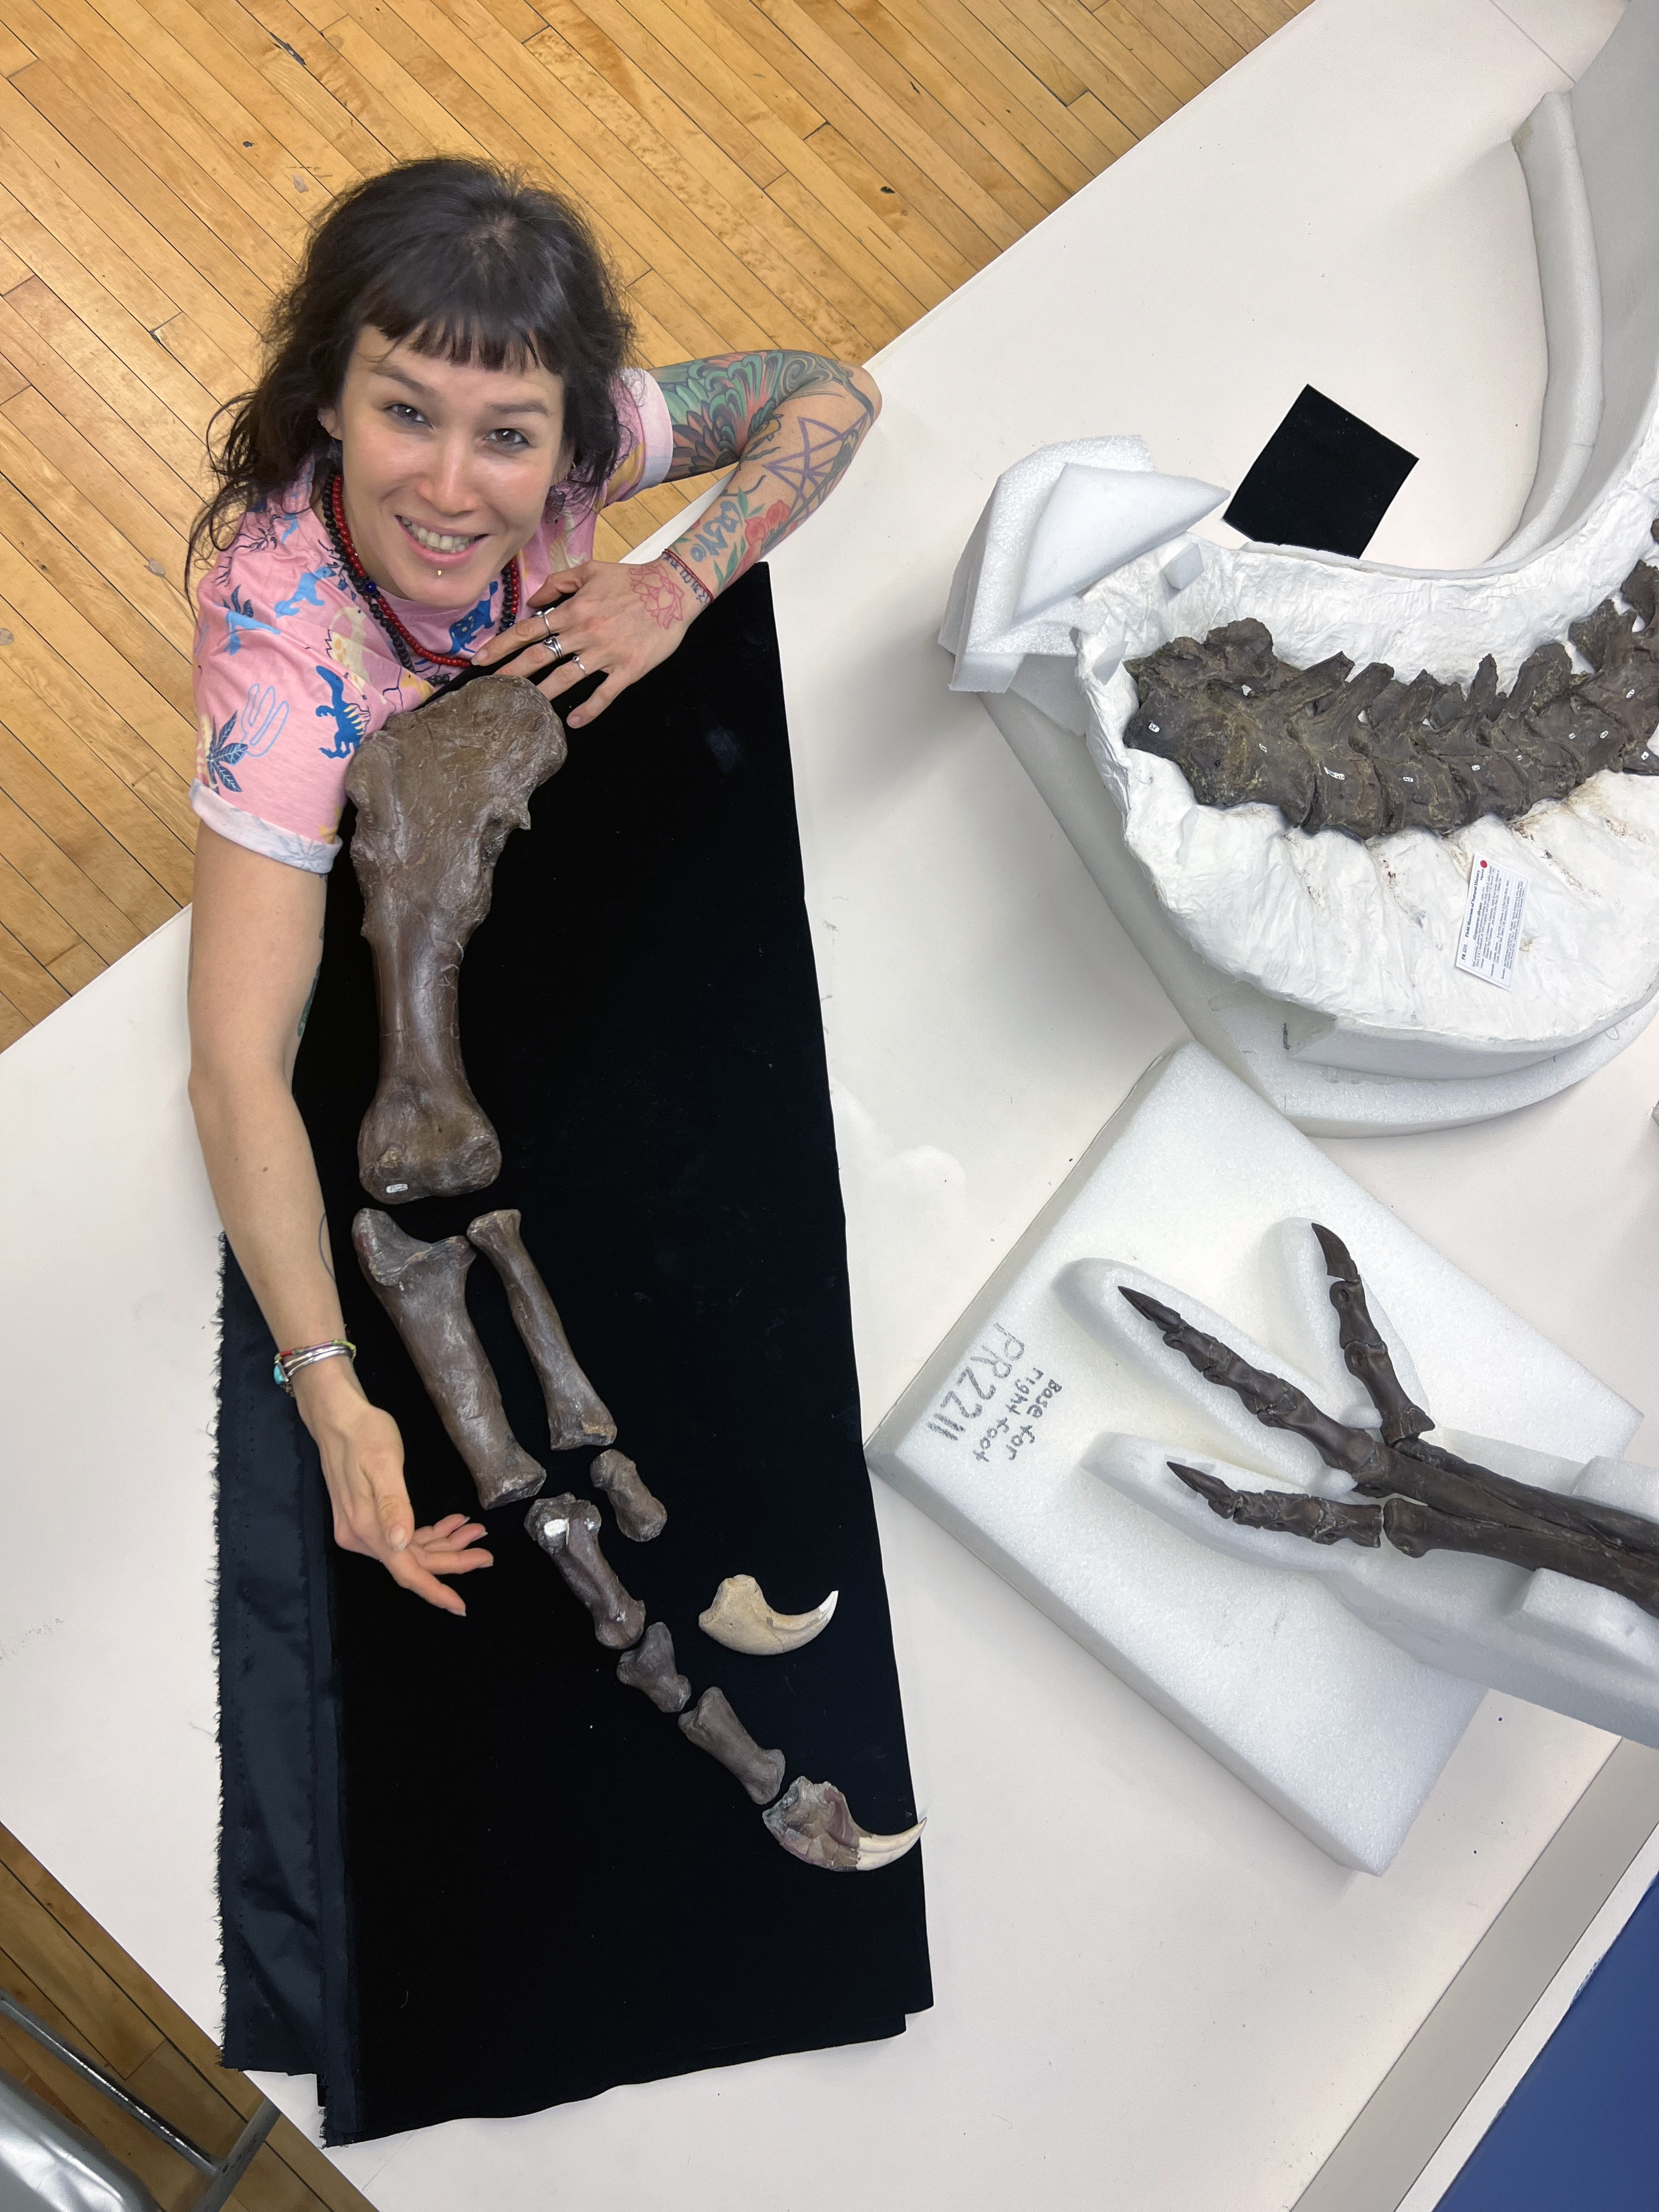 A woman sitting at a table looks up at an overhead camera. On the table are several dinosaur fossils, one that the woman is comparing her arm size to.